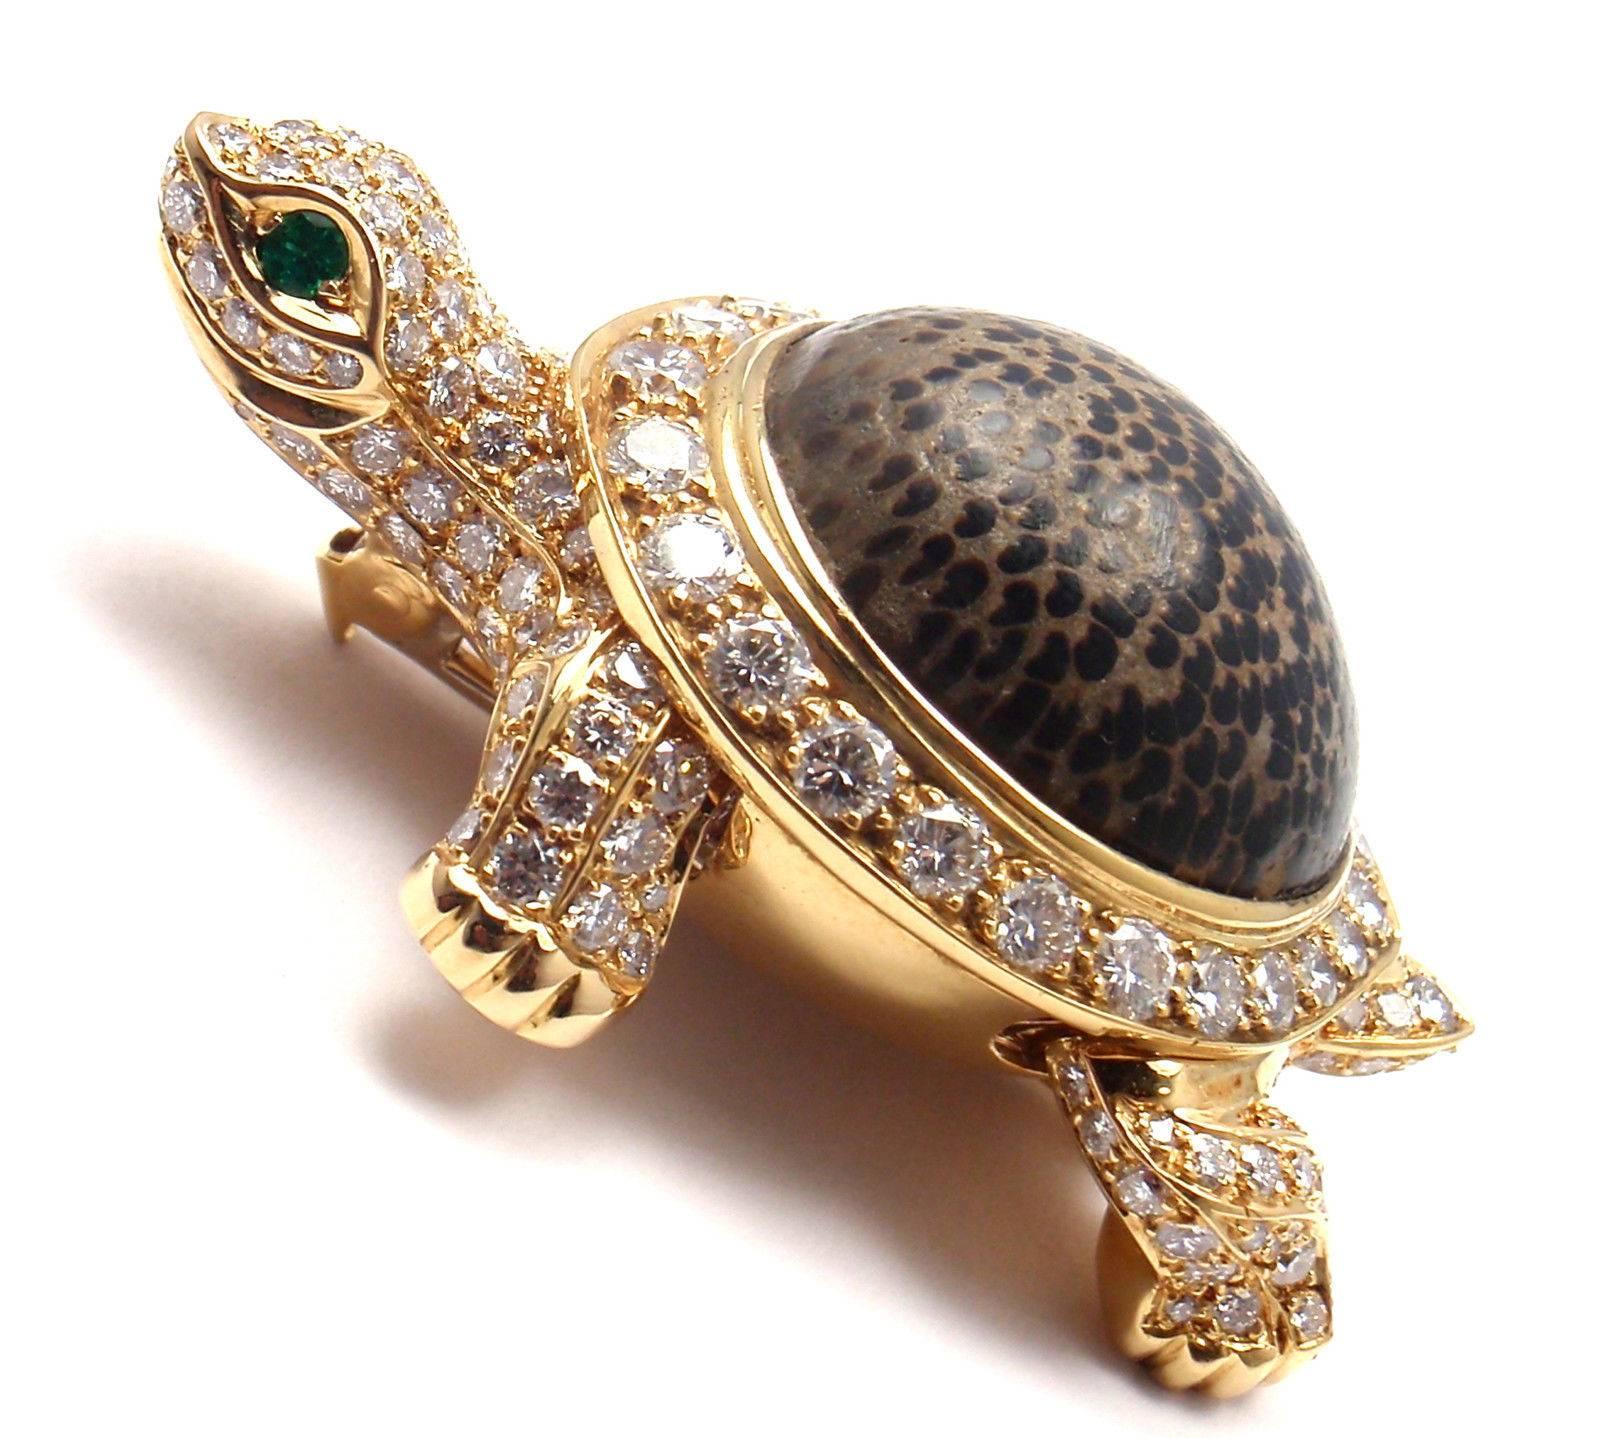 18k Yellow Gold Diamond, Fossil Jasper and Emerald Large Turtle Pin Brooch by Cartier. 
This brooch comes with an original Cartier box. 
With Round brilliant cut diamonds VVS1 clarity, E color total weight 
approx. 6ct
1 large fossil jasper